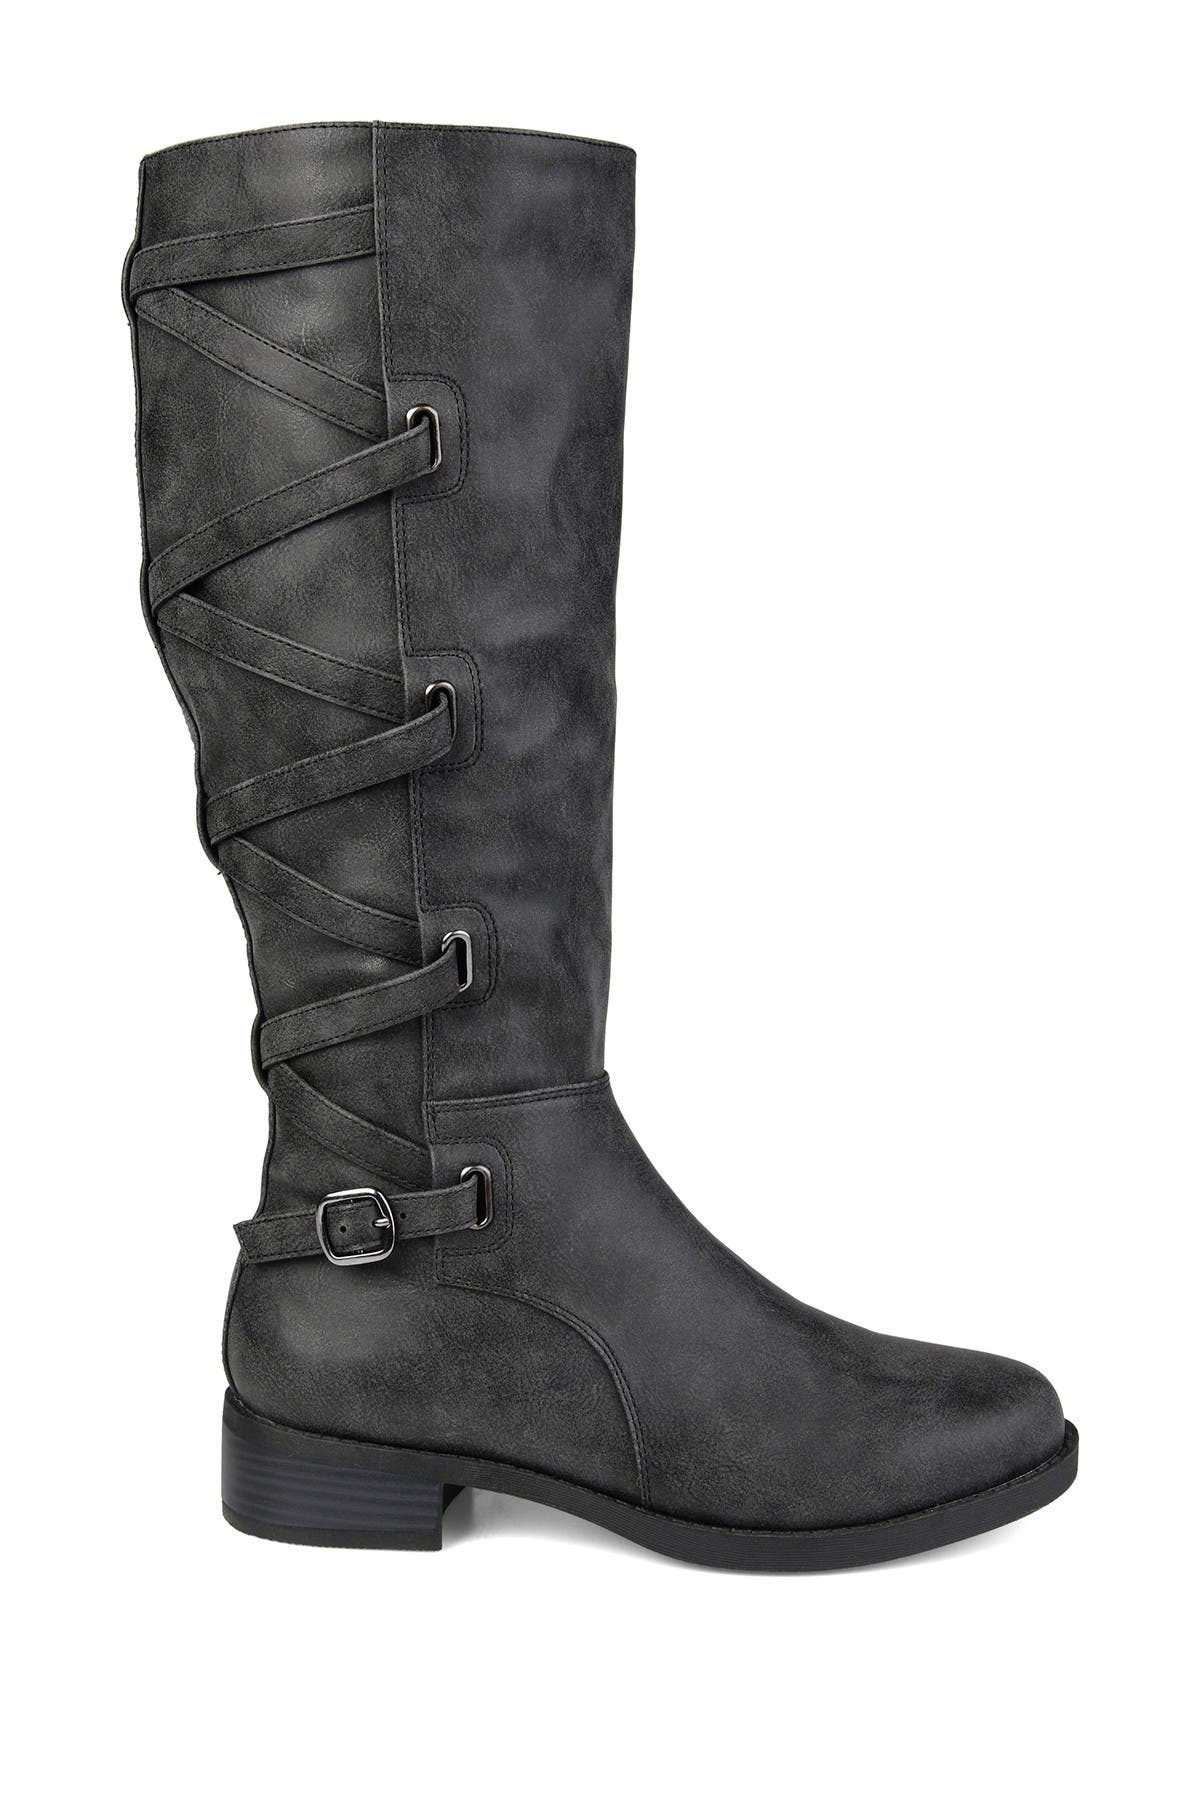 wide calf lace up back boots